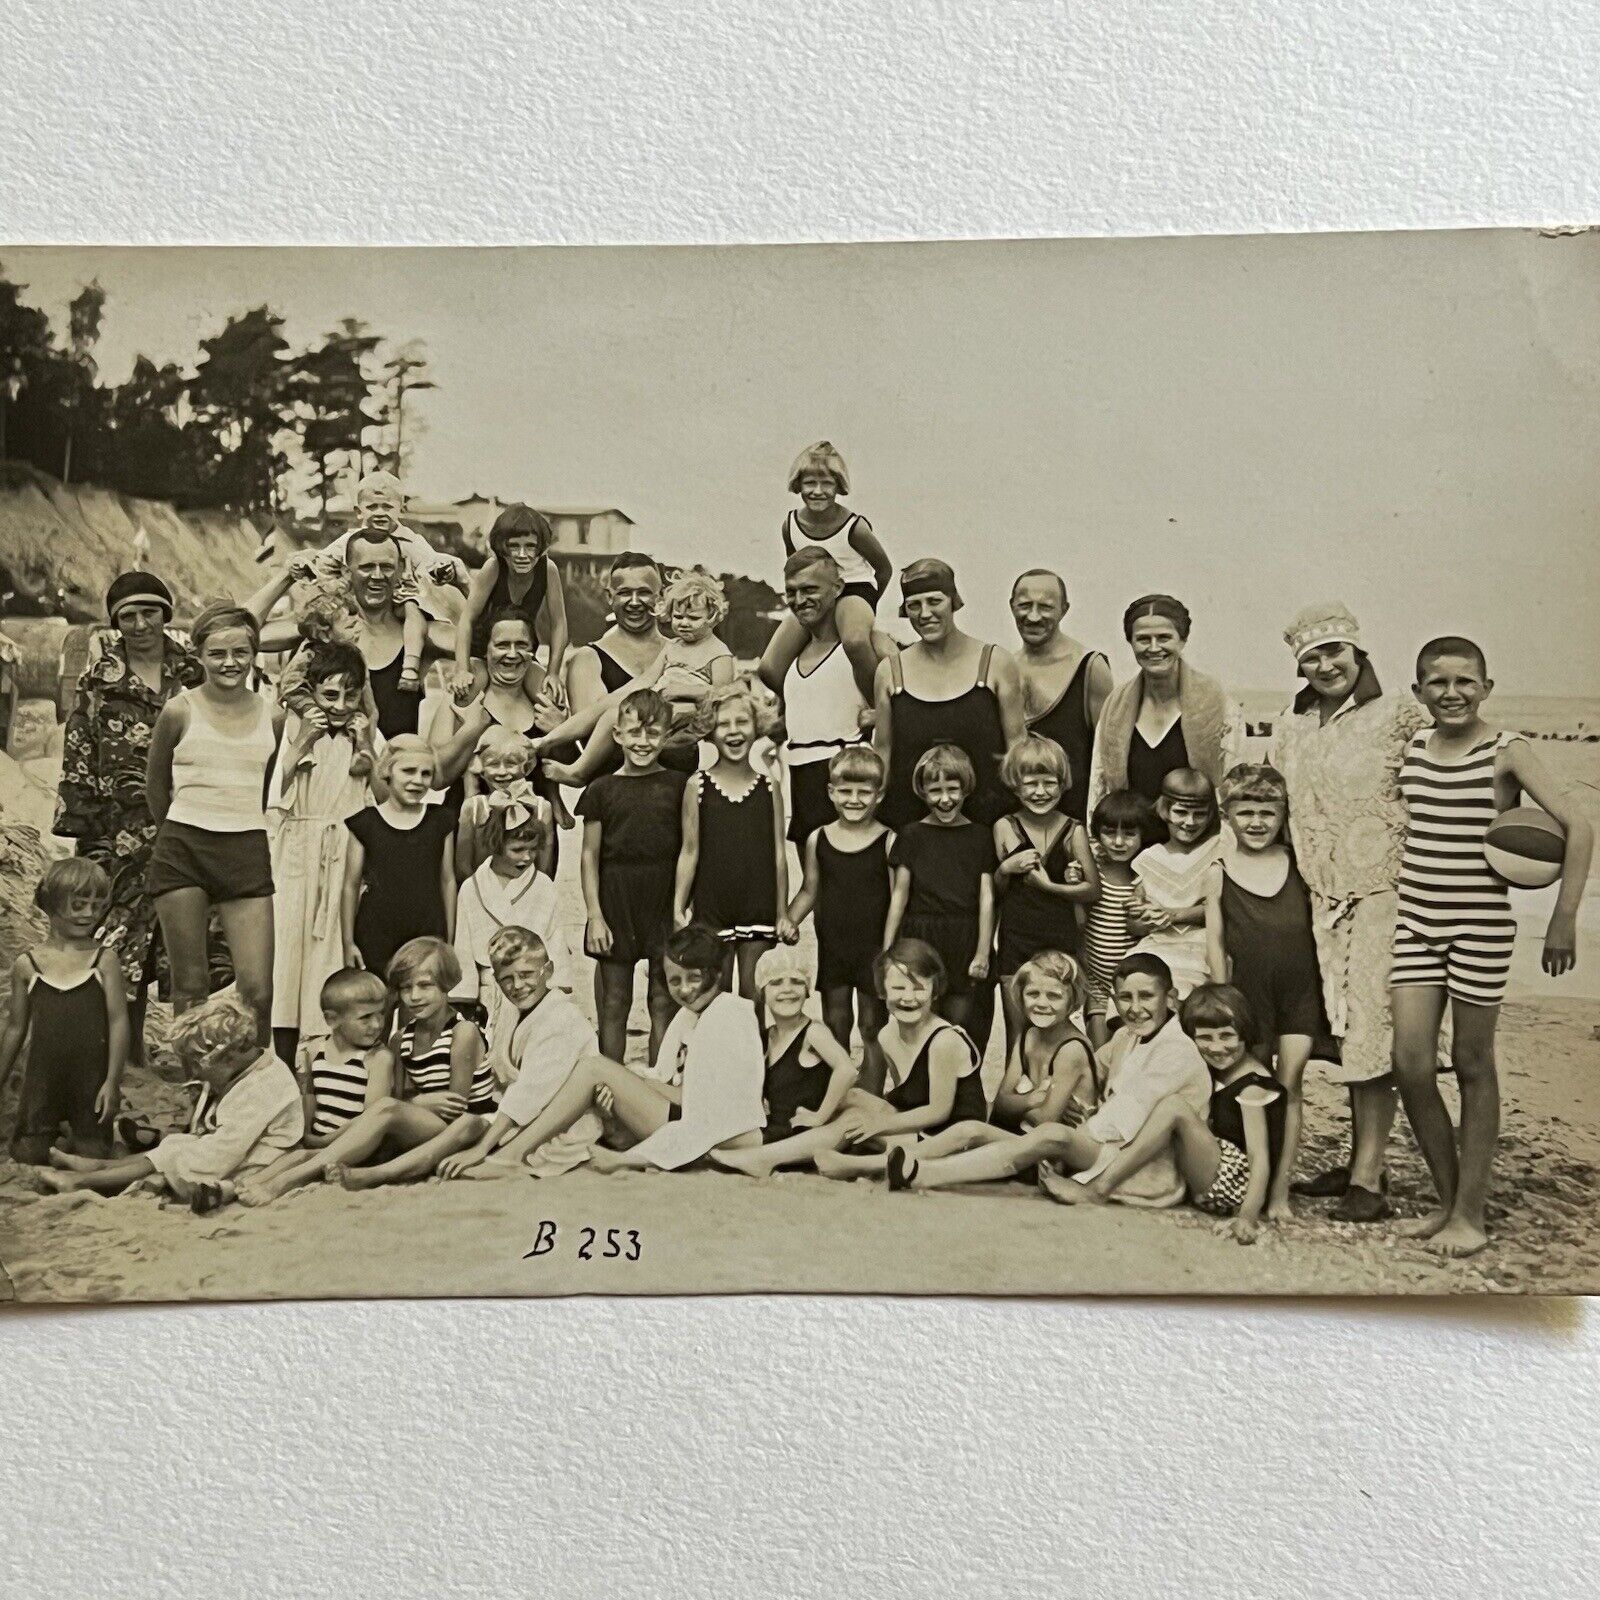 Antique RPPC Real Photograph Postcard Family Fun At Beach Old Fashion Swimsuits